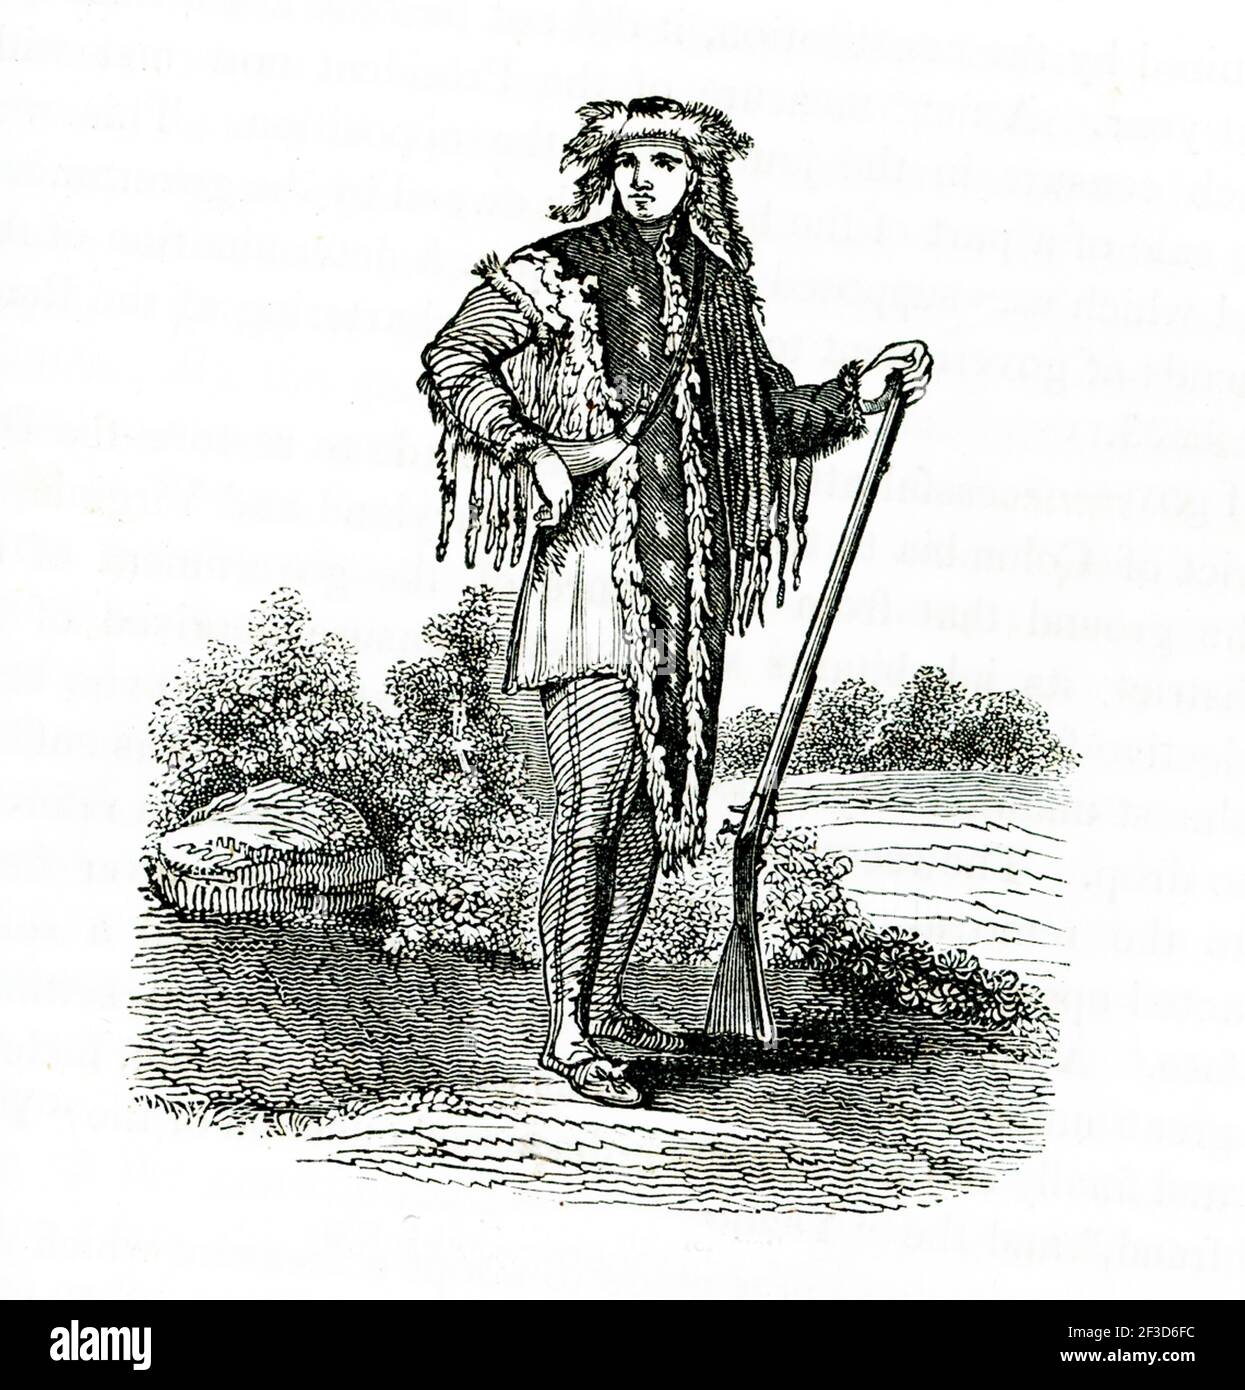 This 1840s illustration shows Captain Meriwether Lewis. Captain Meriwether Lewis (1774 – 1809) was an American explorer, soldier, politician, and public administrator, best known for his role as the leader of the Lewis and Clark Expedition, also known as the Corps of Discovery, with William Clark. William Clark (1770-1838)  was an American explorer, soldier, Indian agent, and territorial governor. A native of Virginia, he grew up in prestatehood Kentucky before later settling in what became the state of Missouri. Stock Photo